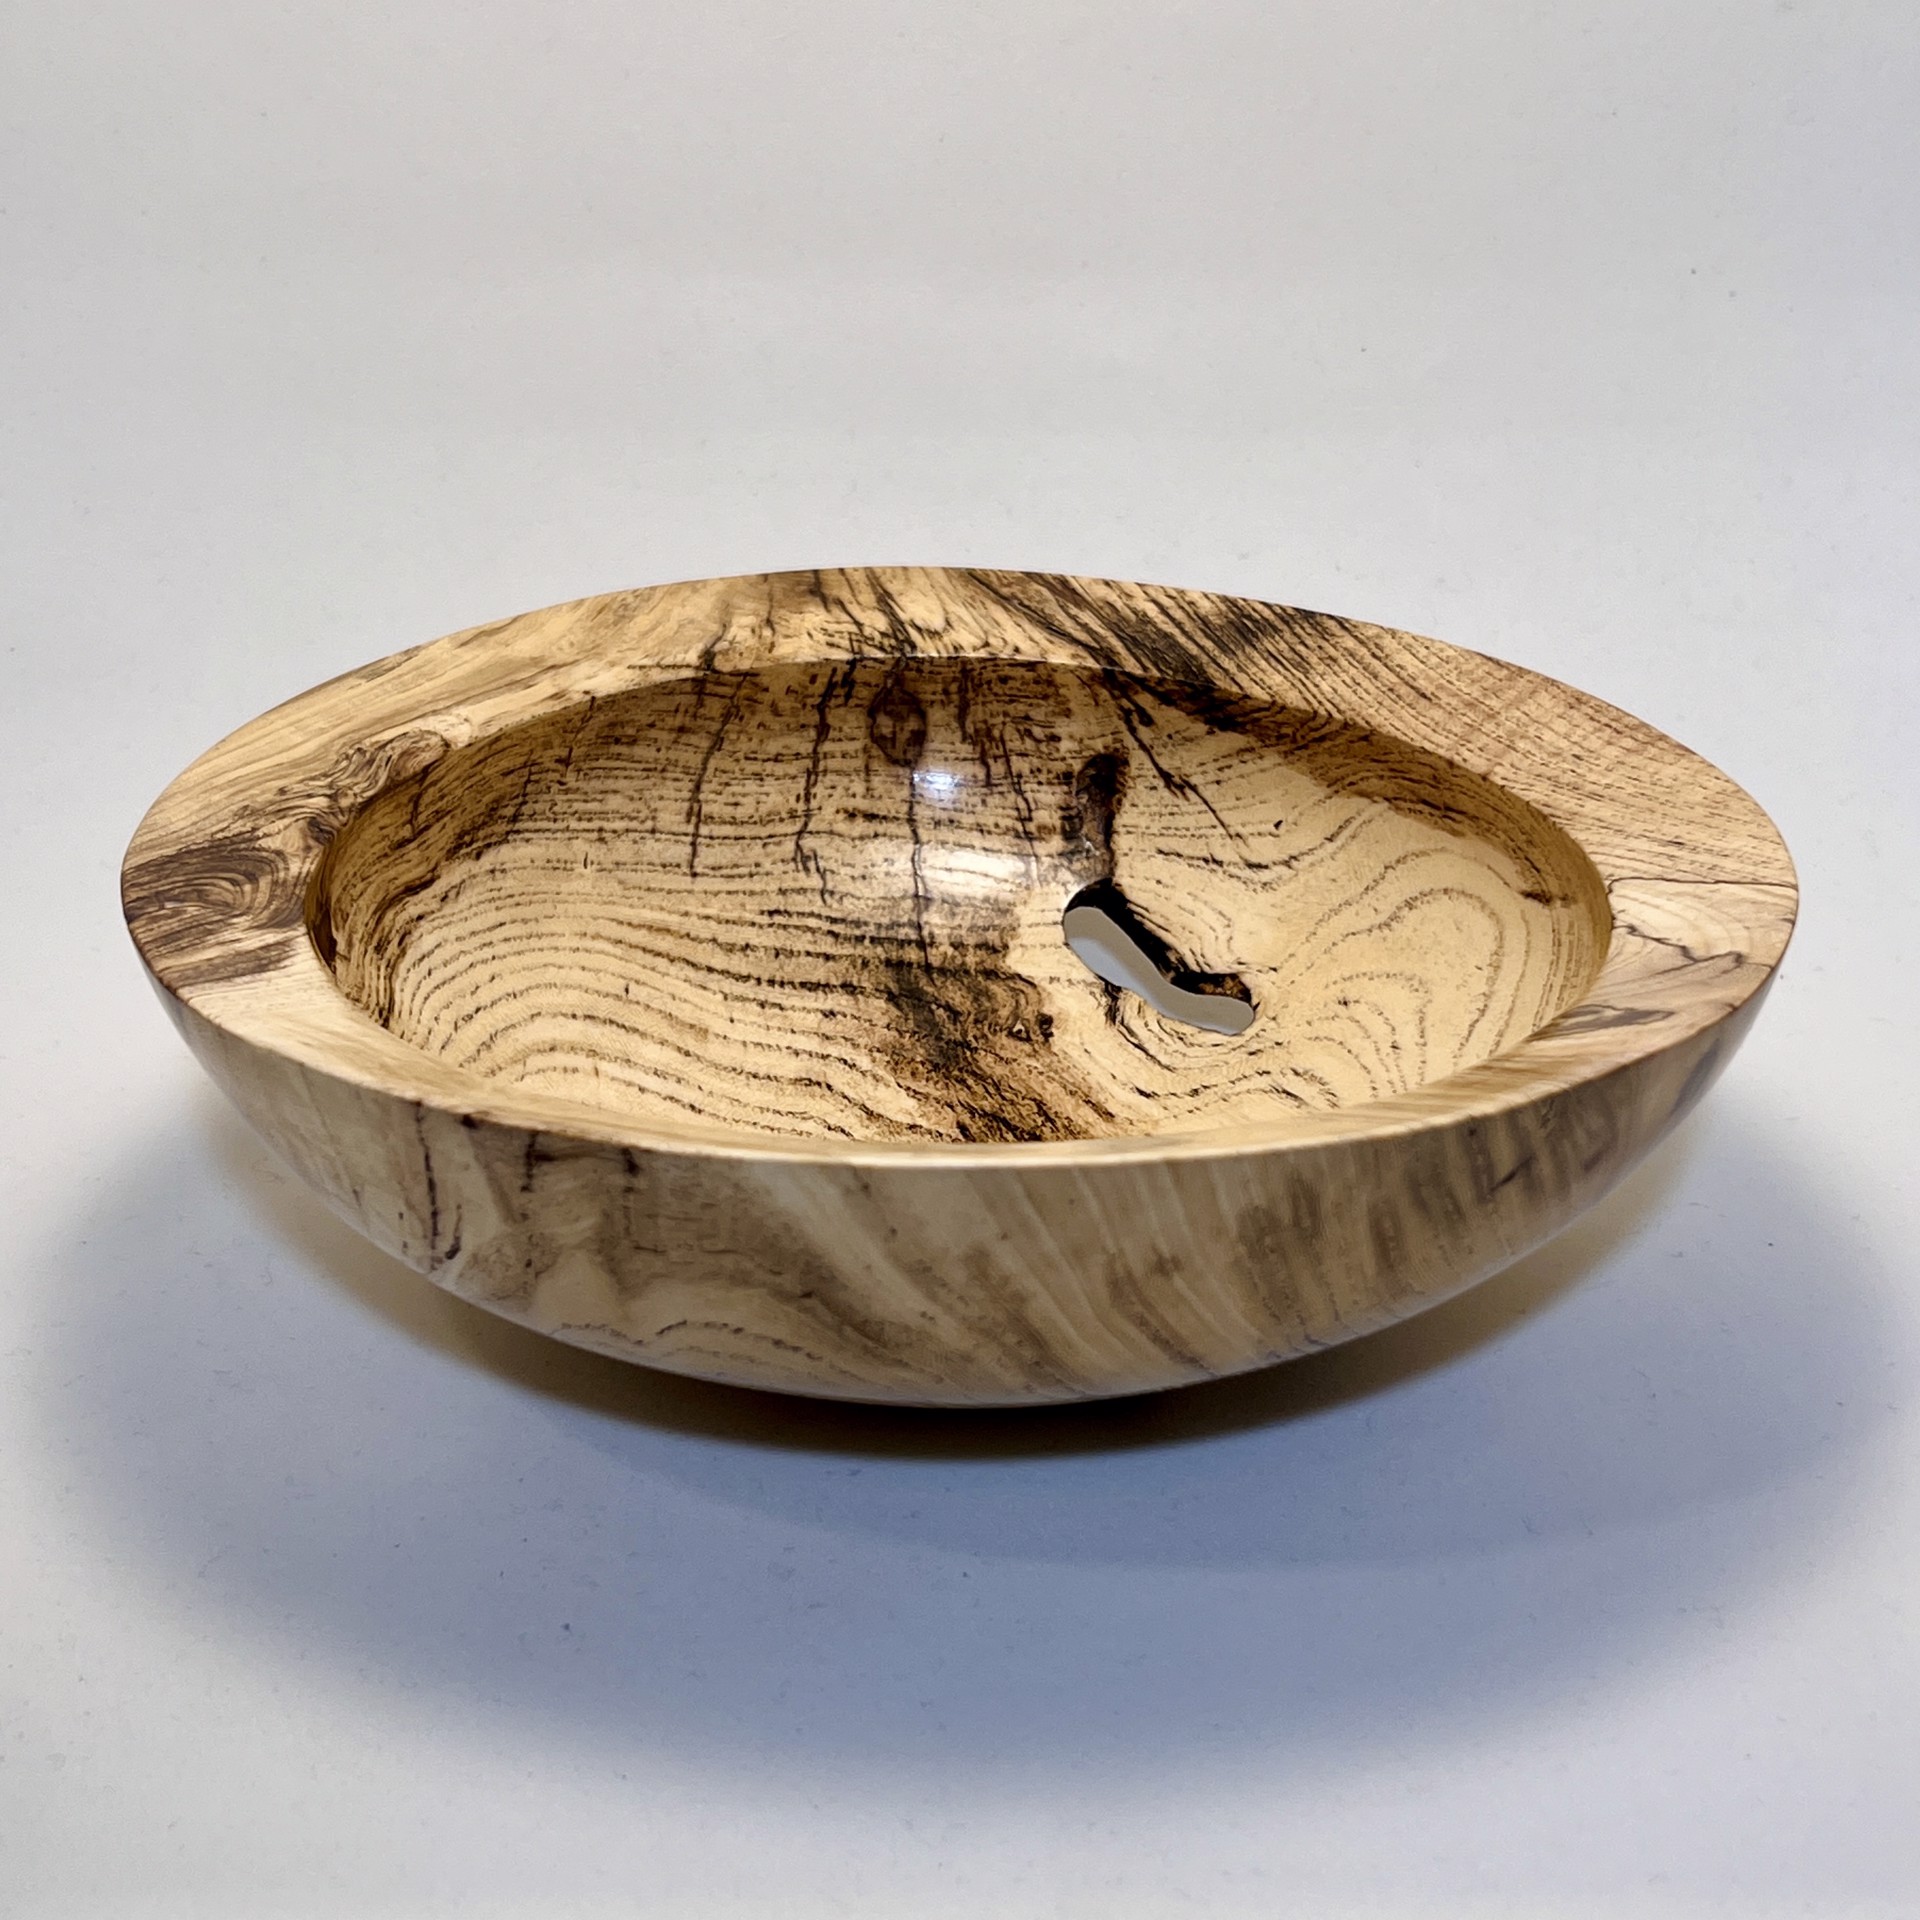 28. Sugar Hackberry Bowl by Don Kaiser